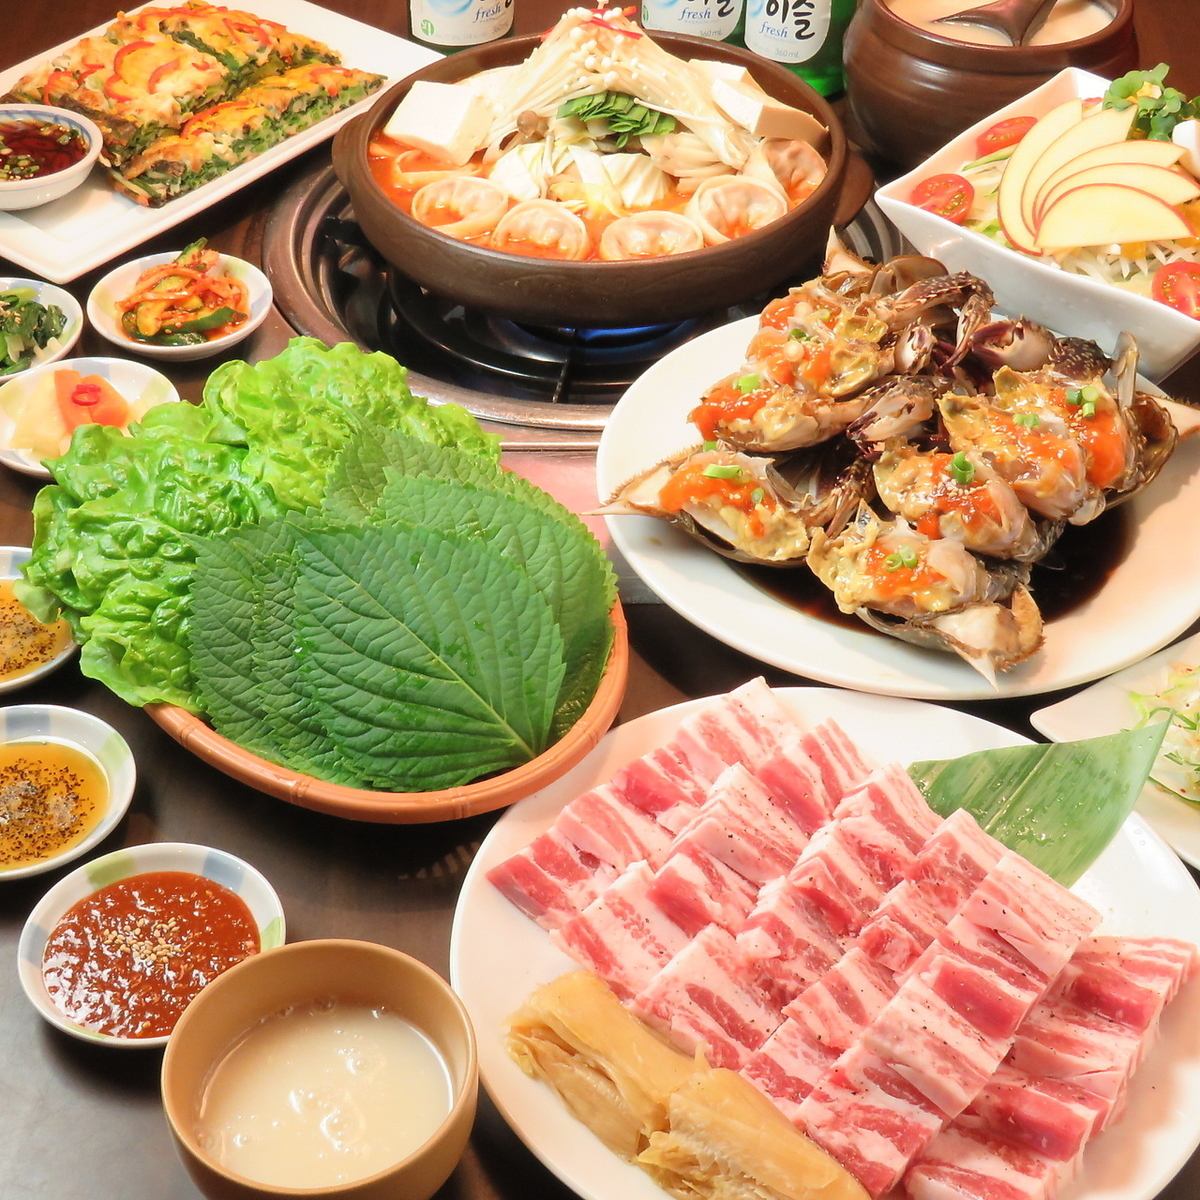 We love to make authentic Korean food, which is said to be the "city of food" in Korea.